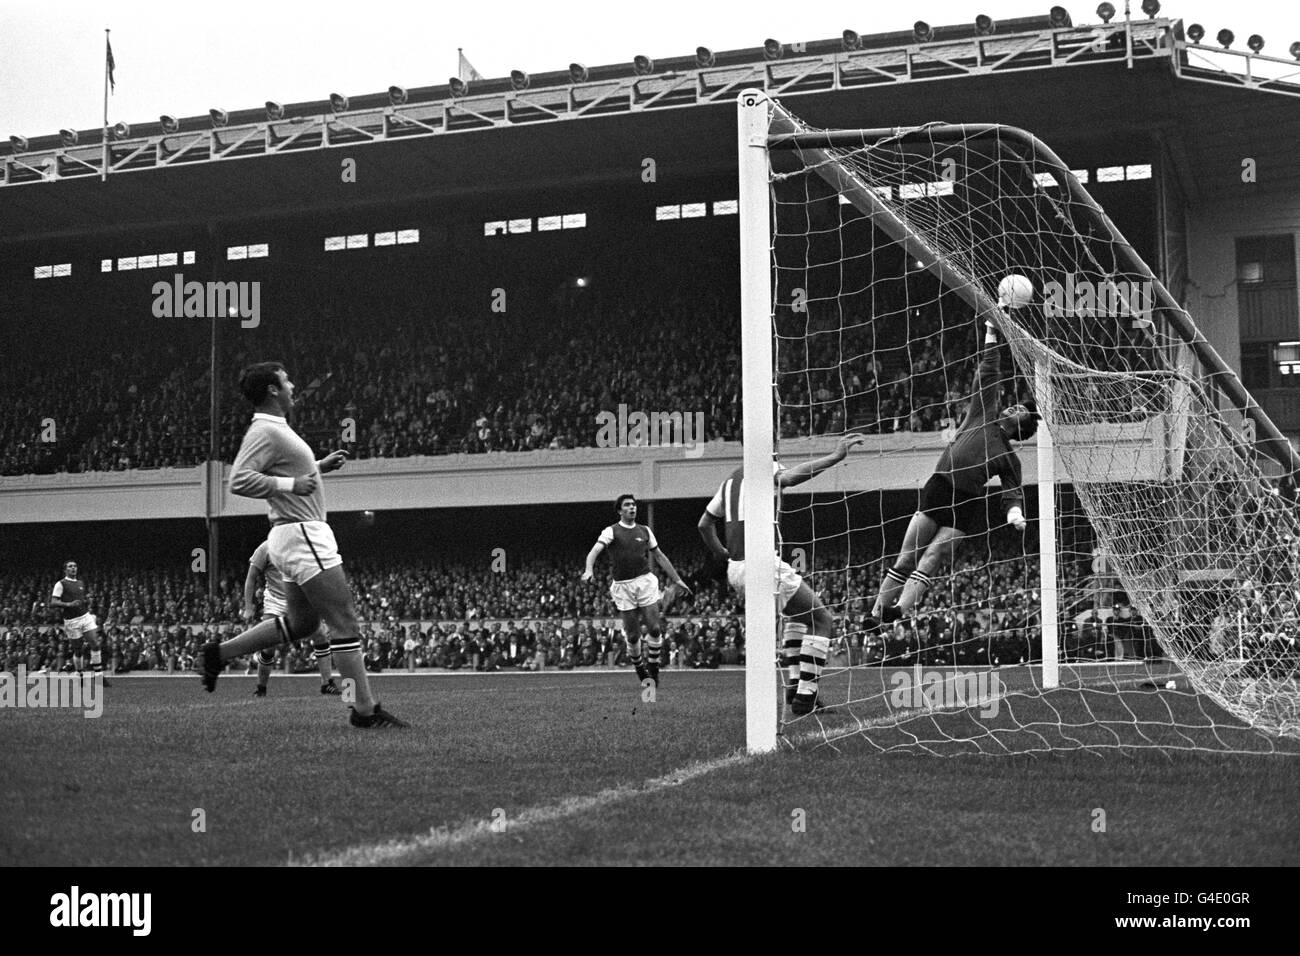 Manchester City goalkeeper Ken Mulhearn tips the ball over the cross bar to save from Arsenal's Bobby Gould (c). Arsenal's David Jenkins (behind goalpost) in following up along with Manchester City's Glyn Pardoe (l). Stock Photo